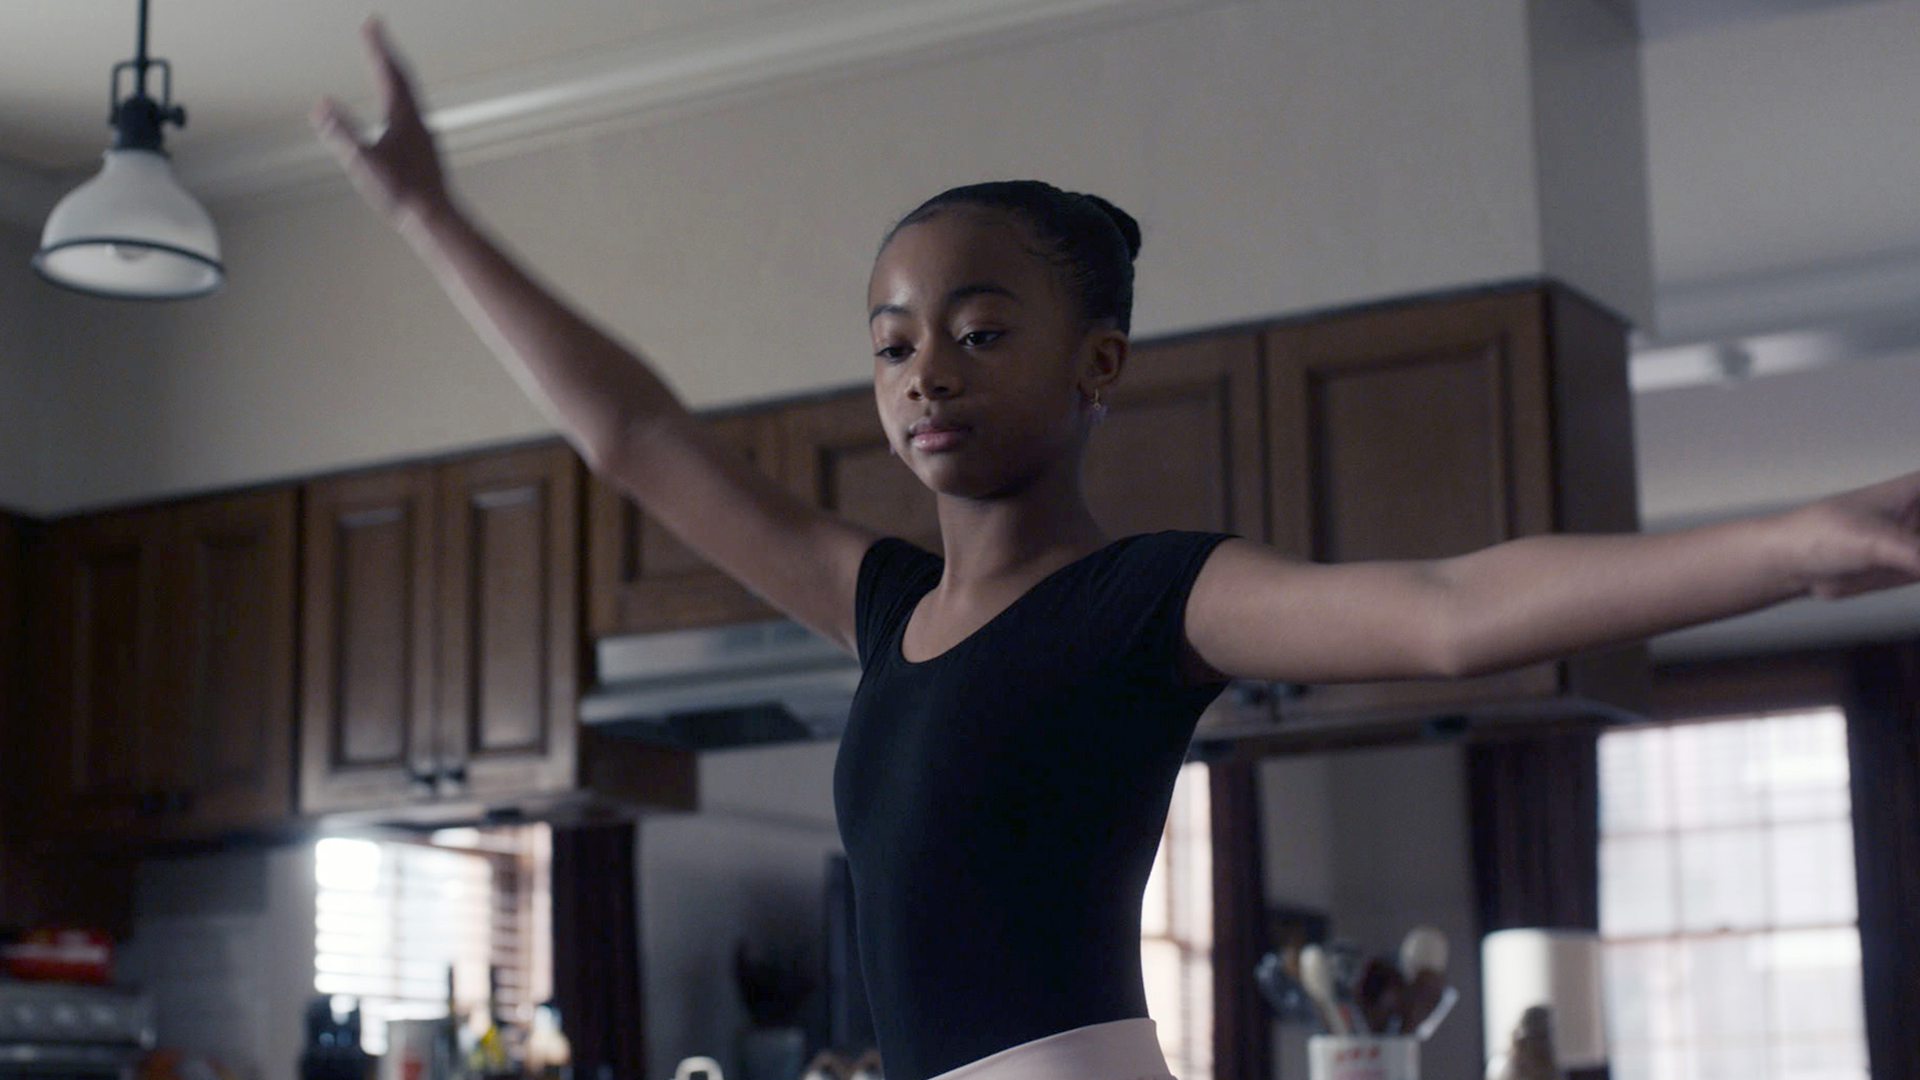 Faithe Herman as Annie practicing ballet in ‘This Is Us’ Season 5 Episode 14